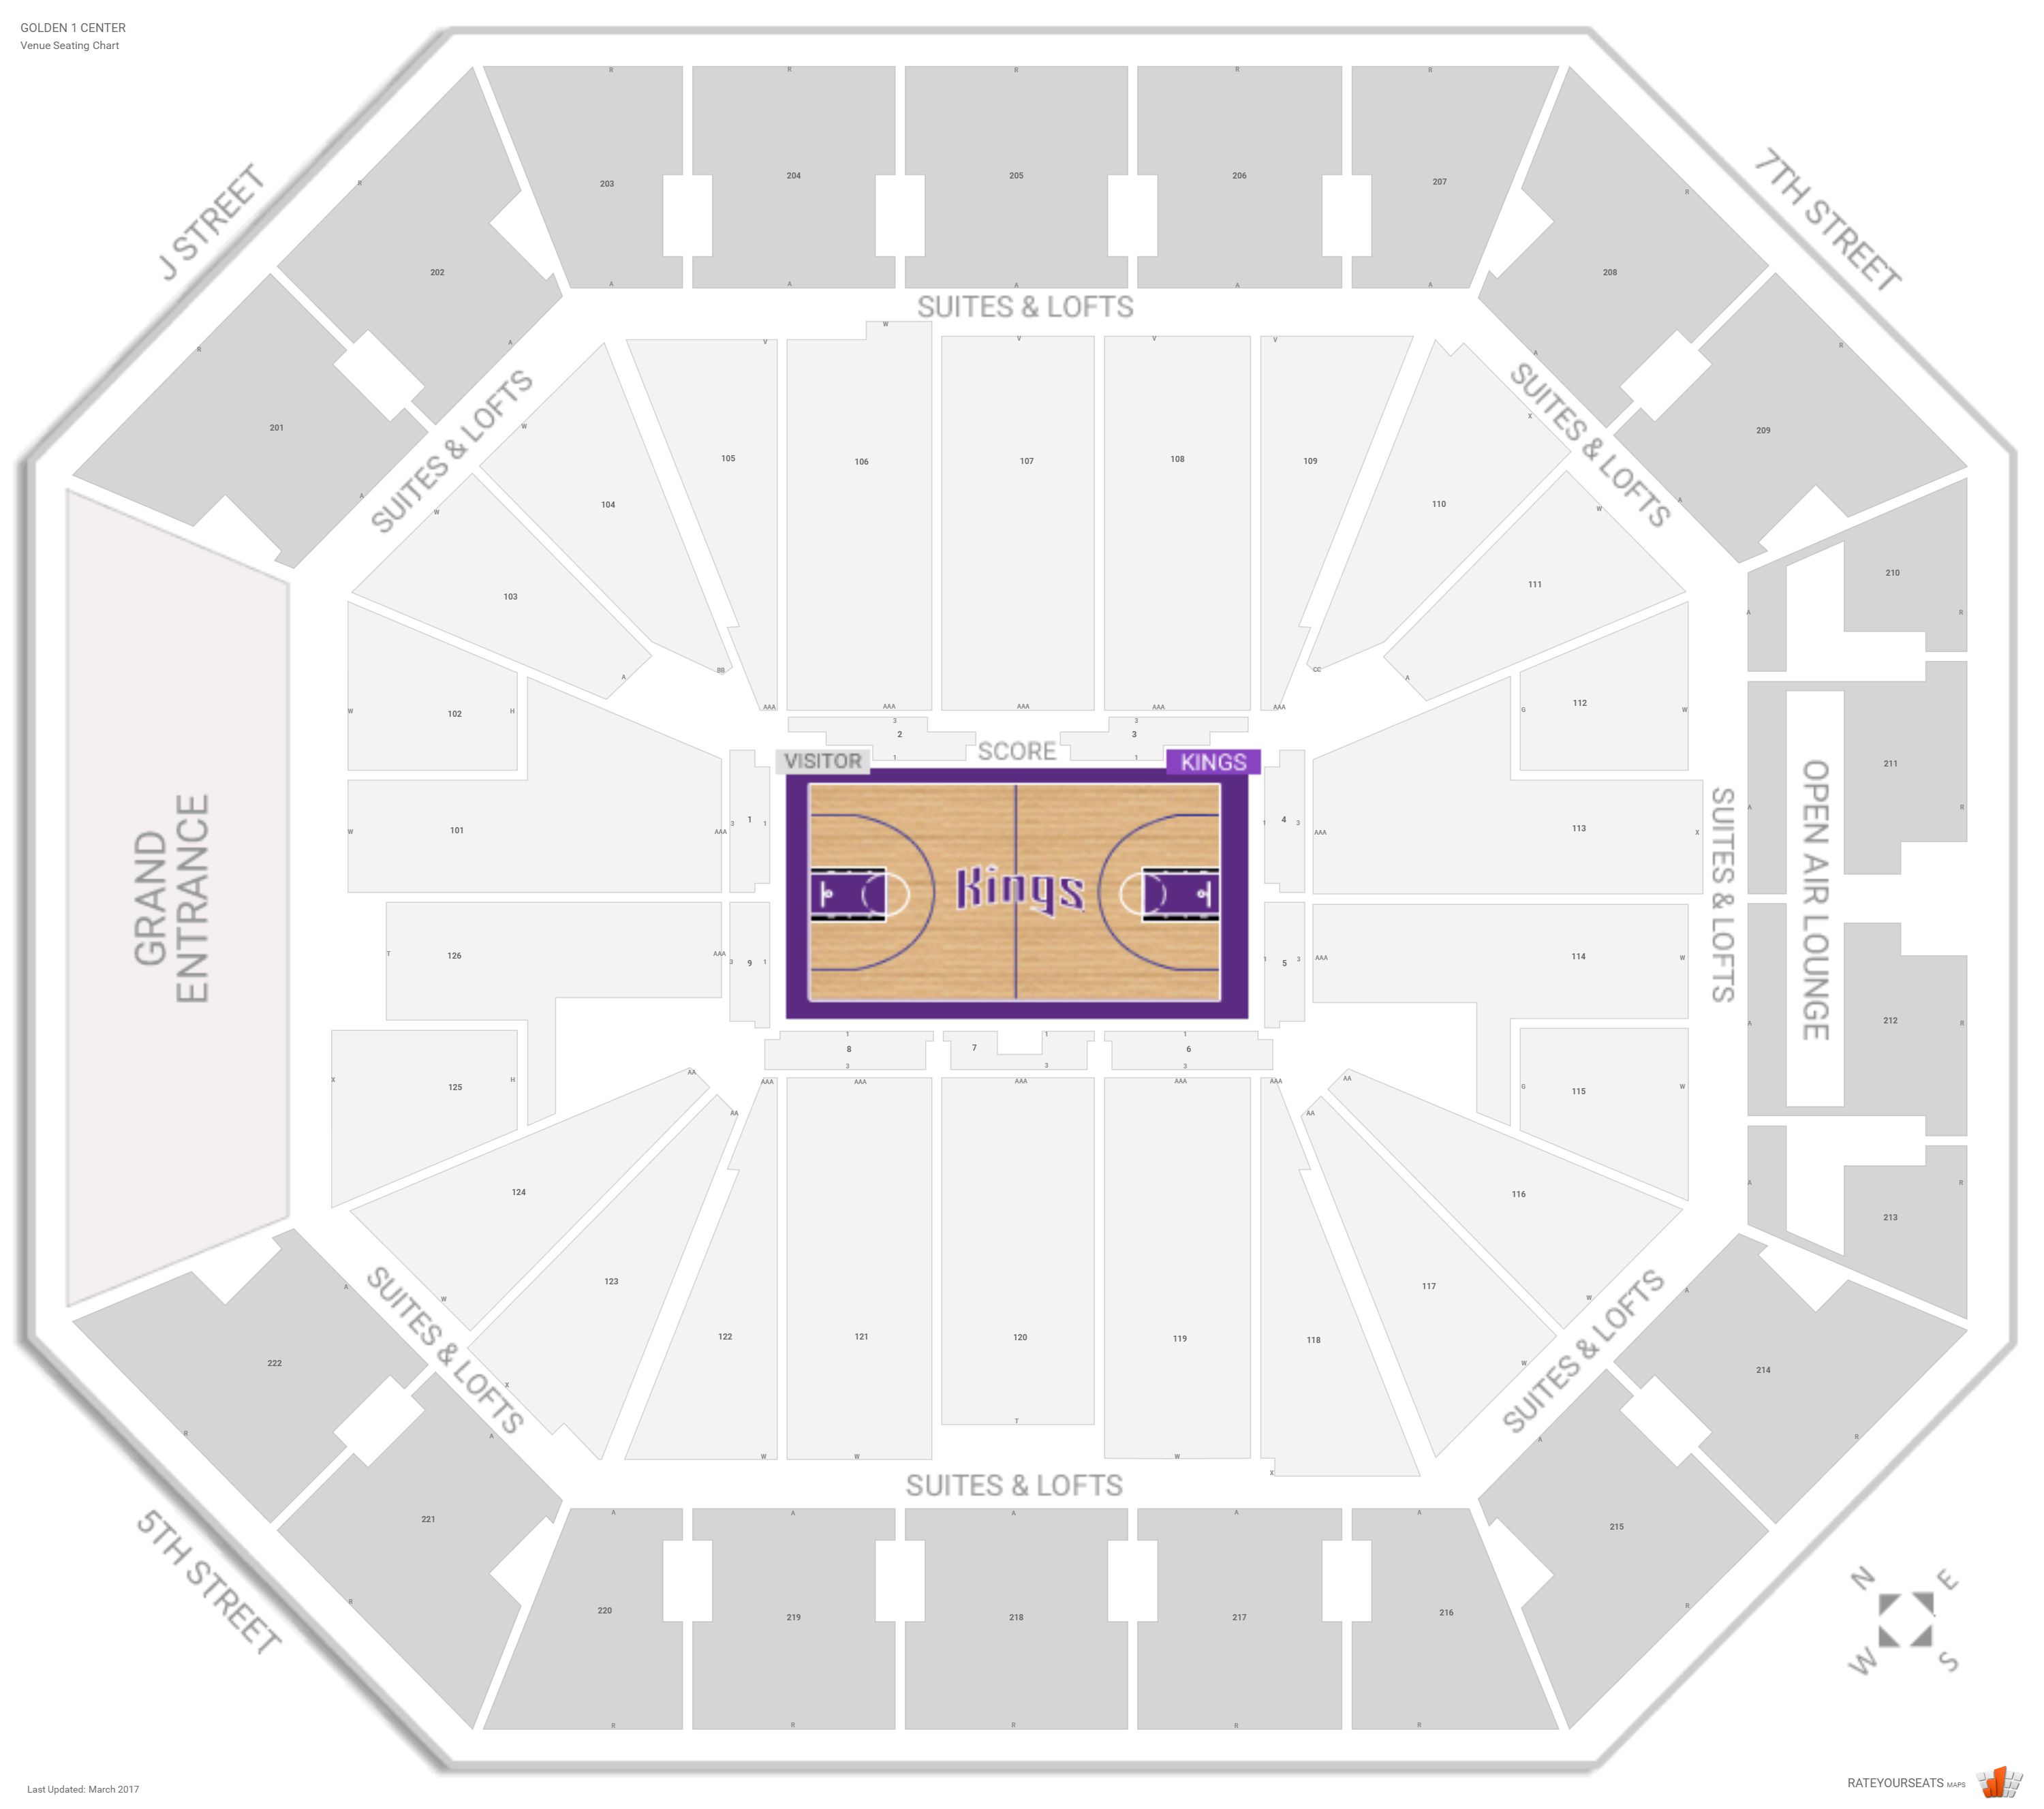 Golden 1 Center Seating Chart With Seat Numbers | Elcho Table